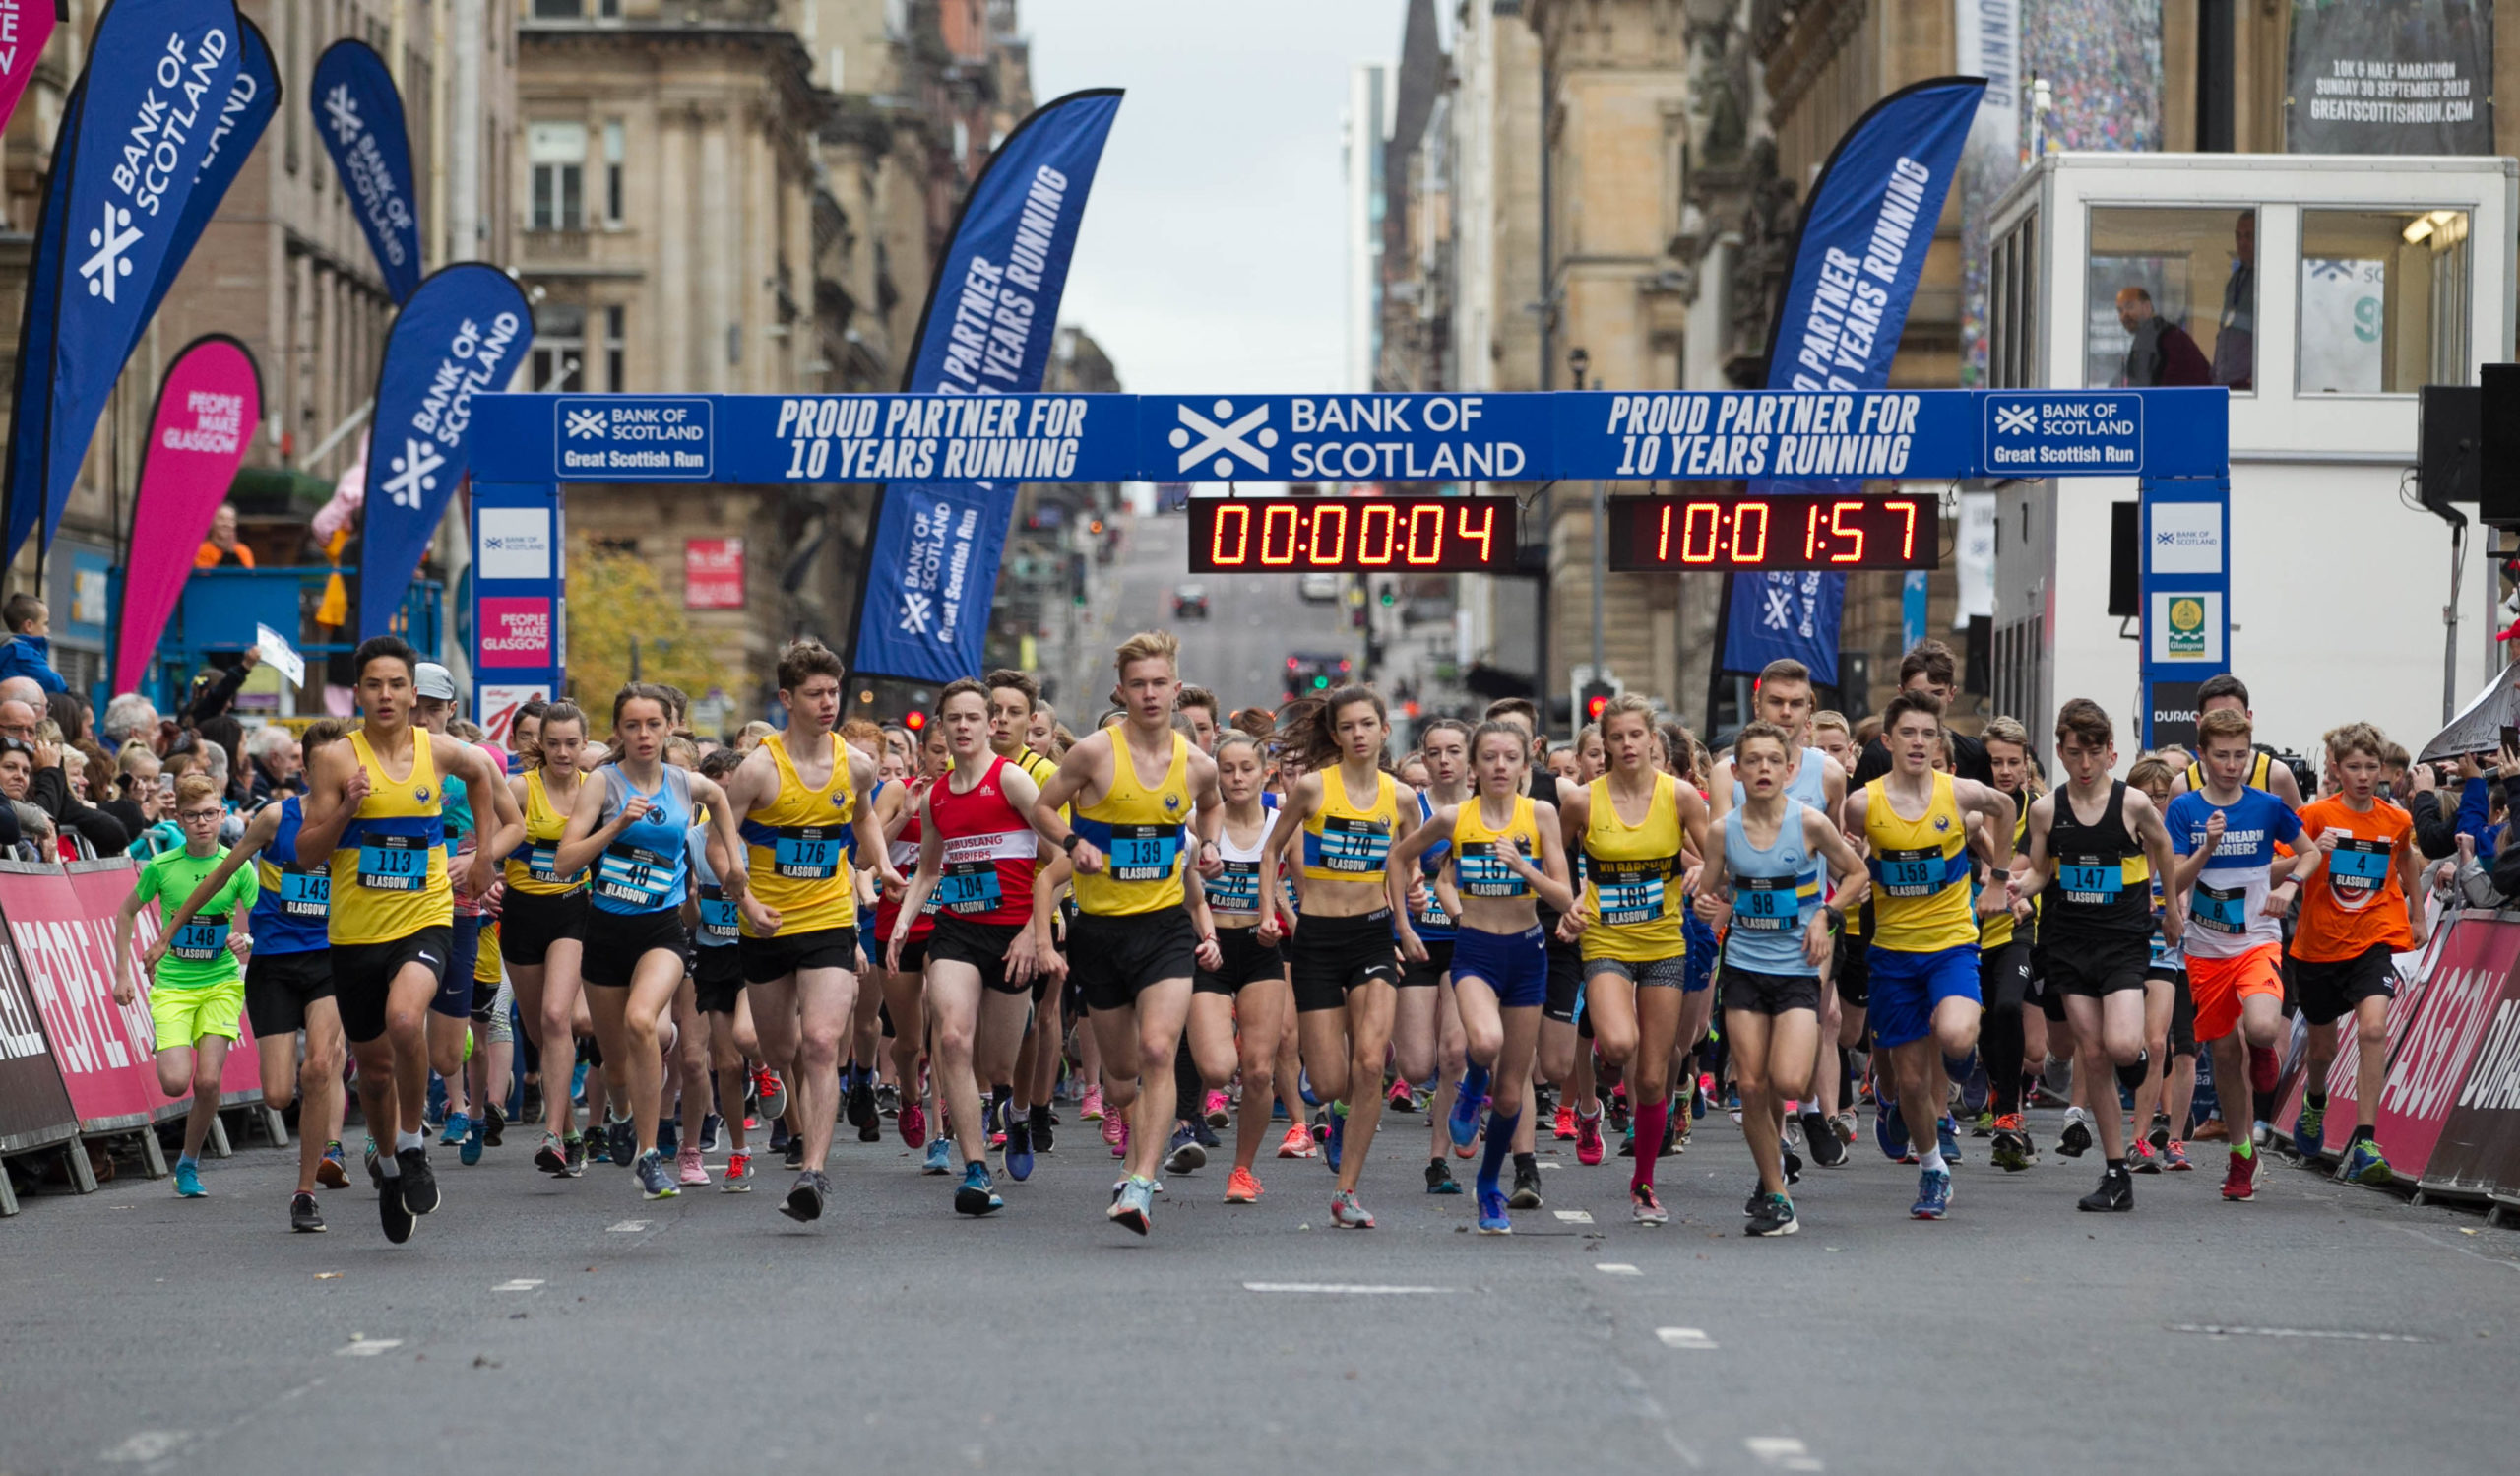 Runners during the Super Saturday family day at The Great Scottish Run